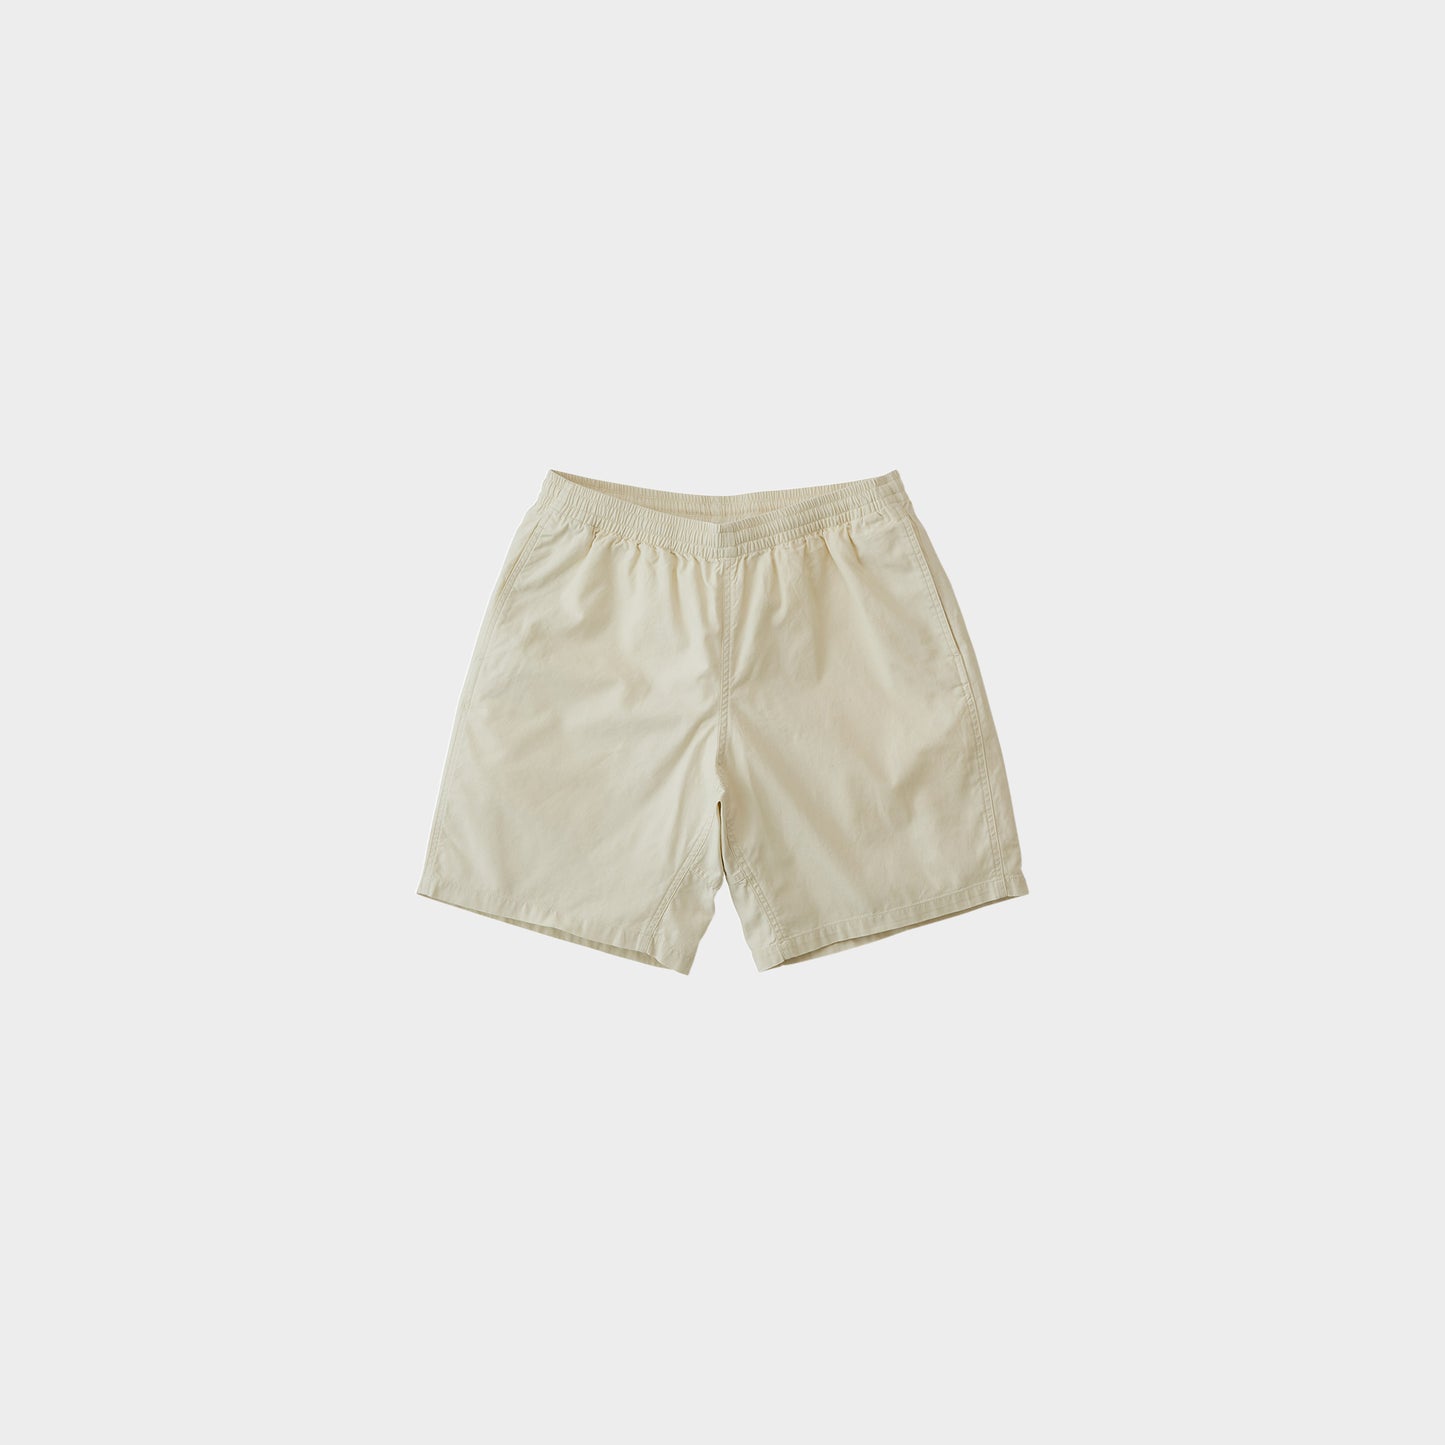 Gramicci Swell Short in sand